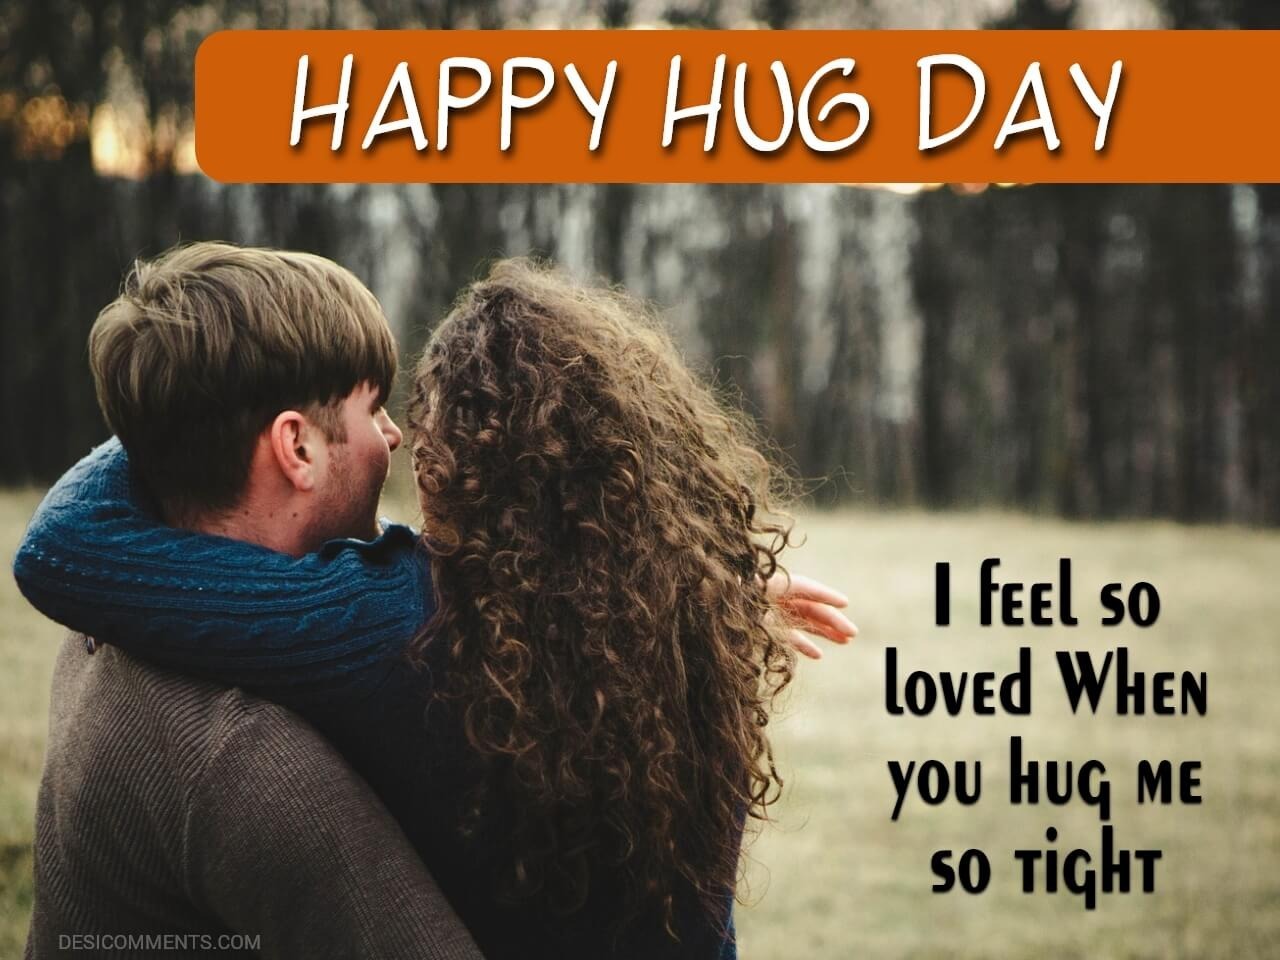 Happy Hug Day 2023 Images & HD Wallpapers for Free Download Online: Send  WhatsApp Messages, Wishes, Greetings, Quotes and Romantic Photos During  Valentine's Week | 🙏🏻 LatestLY